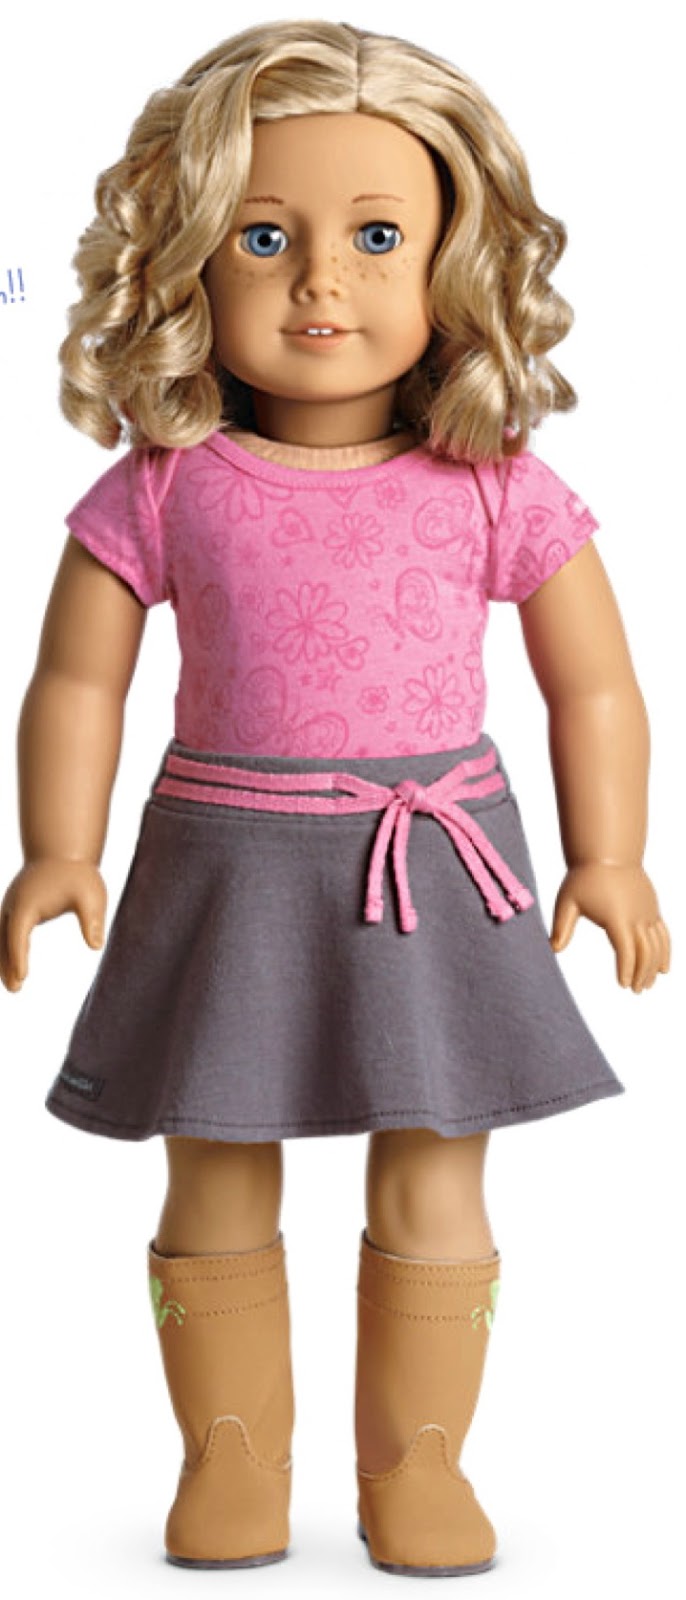 AmericanGirl01: Want To Win A American Girl Doll??